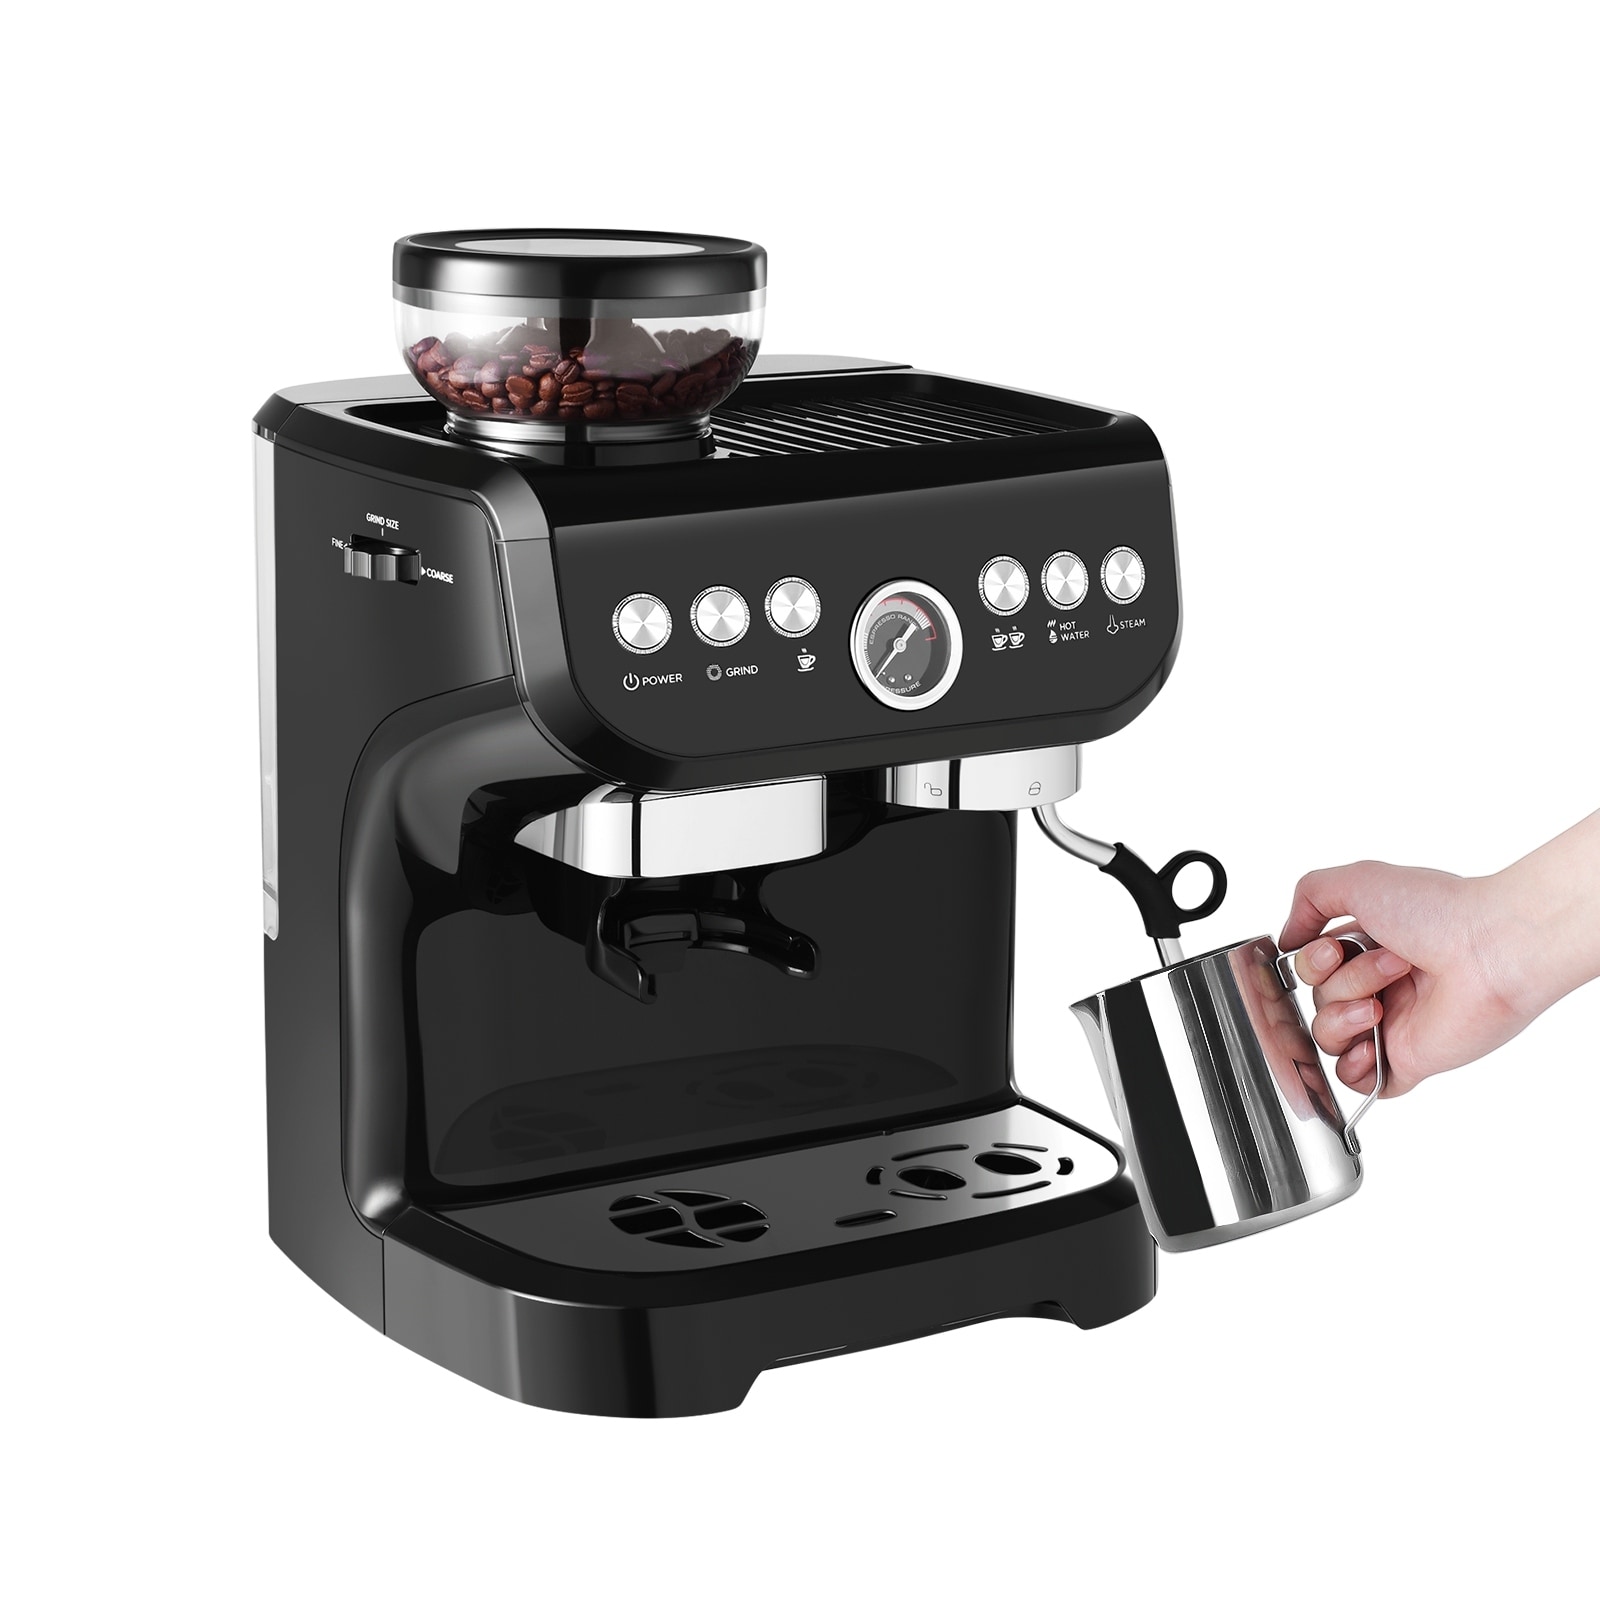 https://ak1.ostkcdn.com/images/products/is/images/direct/588e6713d2897b61ff481c8cca174b64c0108cc8/Stainless-Steel-Espresso-Machine-Commercial-Coffee-Maker-Automatic-Garland-Steam-Milk-Frothing-Machine.jpg